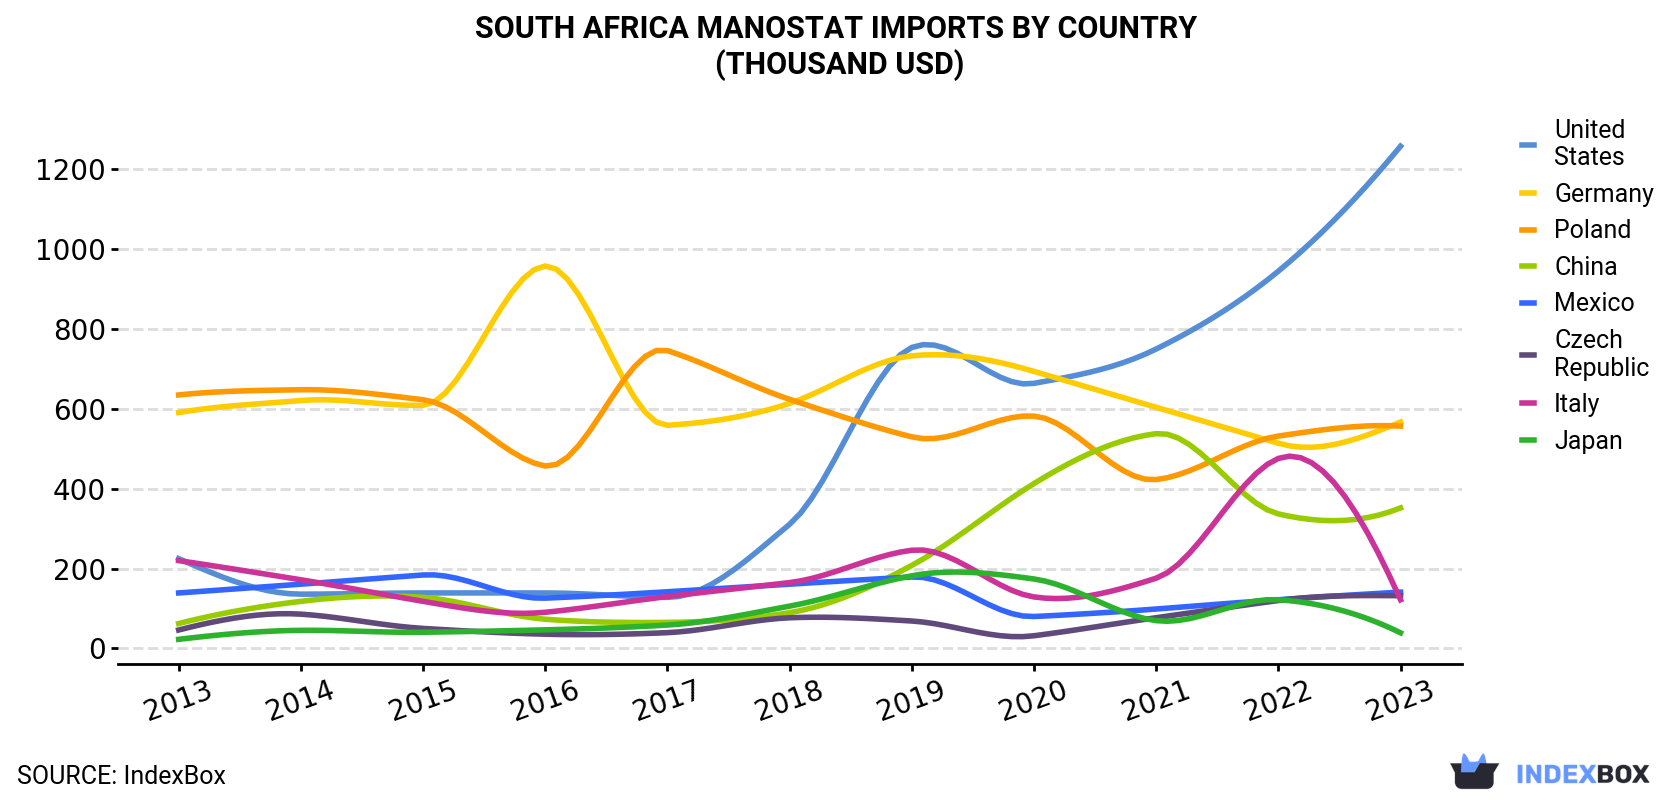 South Africa Manostat Imports By Country (Thousand USD)